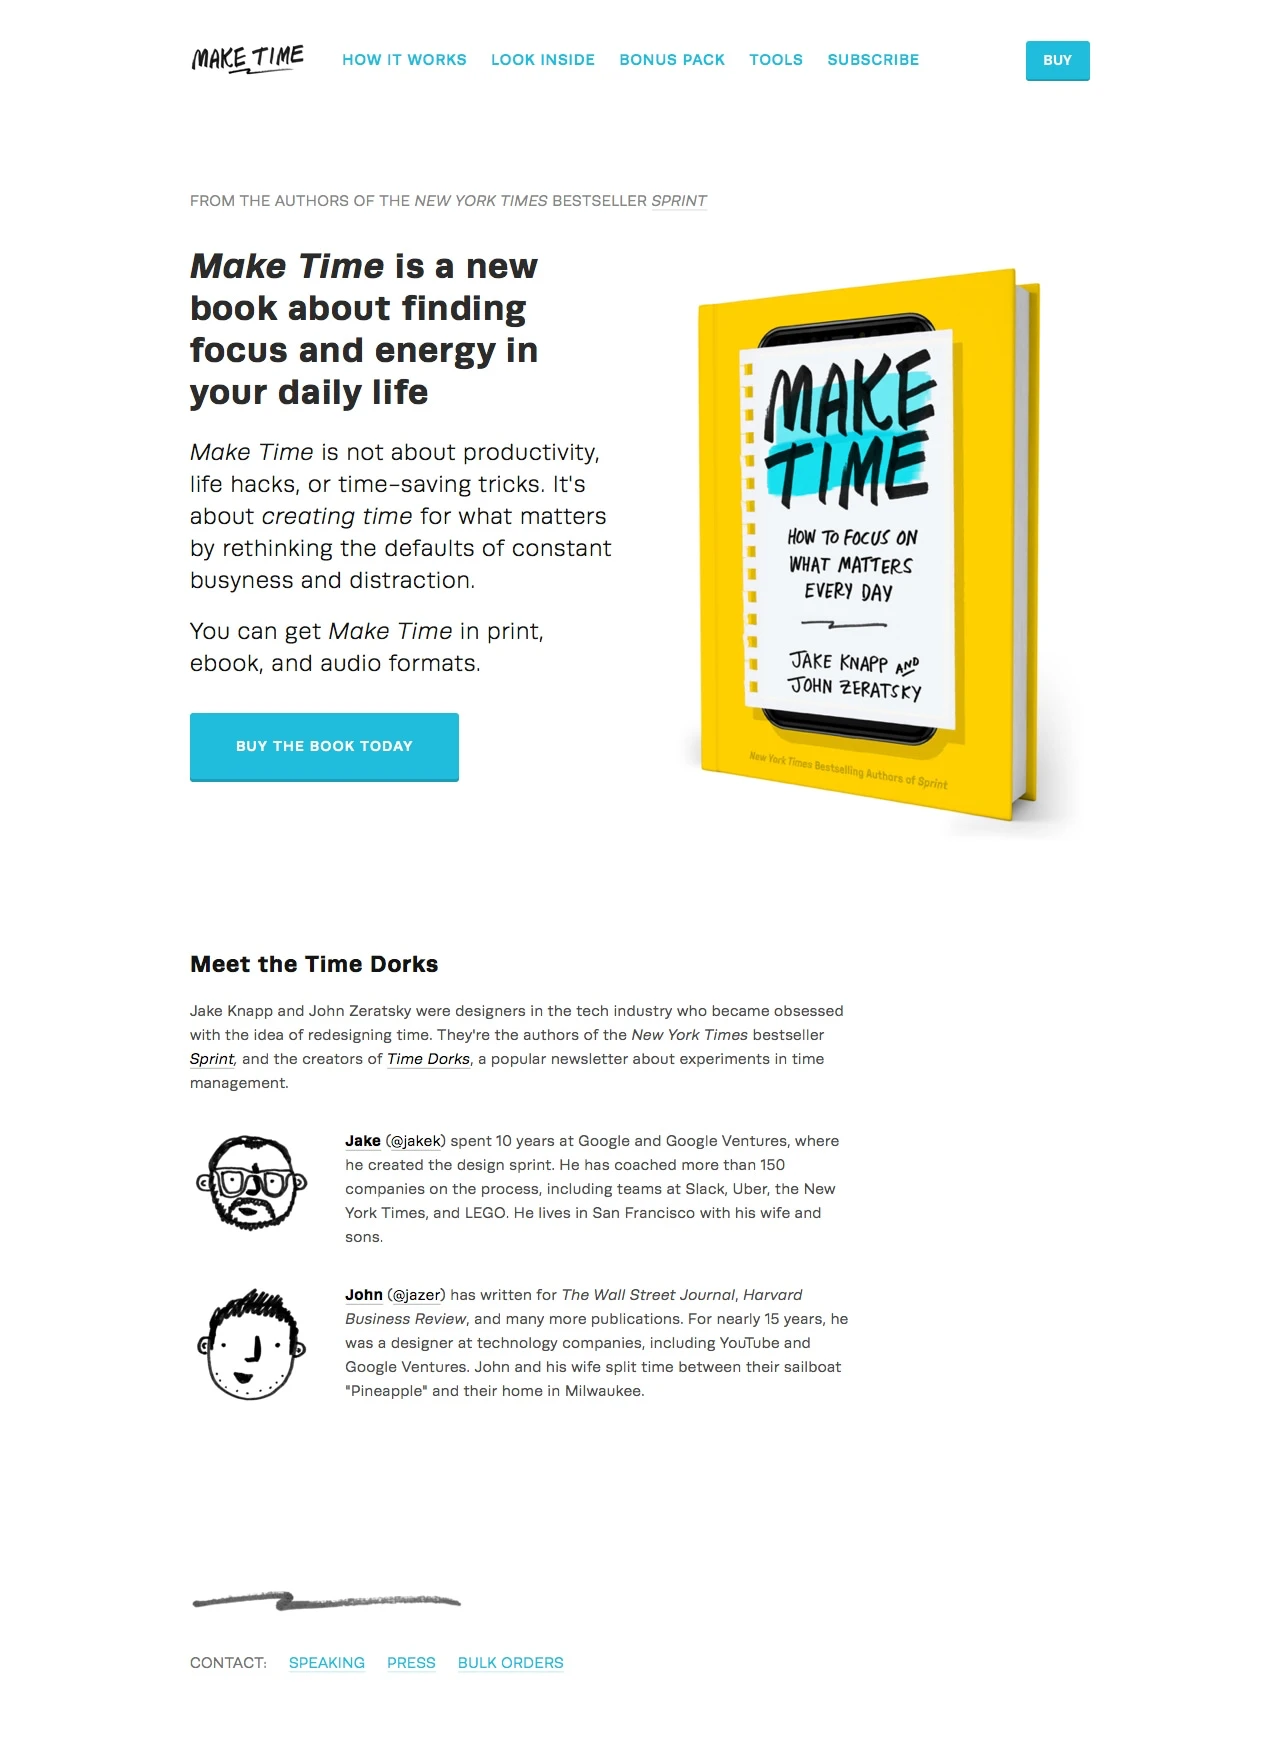 Make Time Landing Page Example: Make Time is a new book about finding focus and energy in your daily life. Make Time is not about productivity, life hacks, or time-saving tricks. It's about creating time for what matters by rethinking the defaults of constant busyness and distraction.